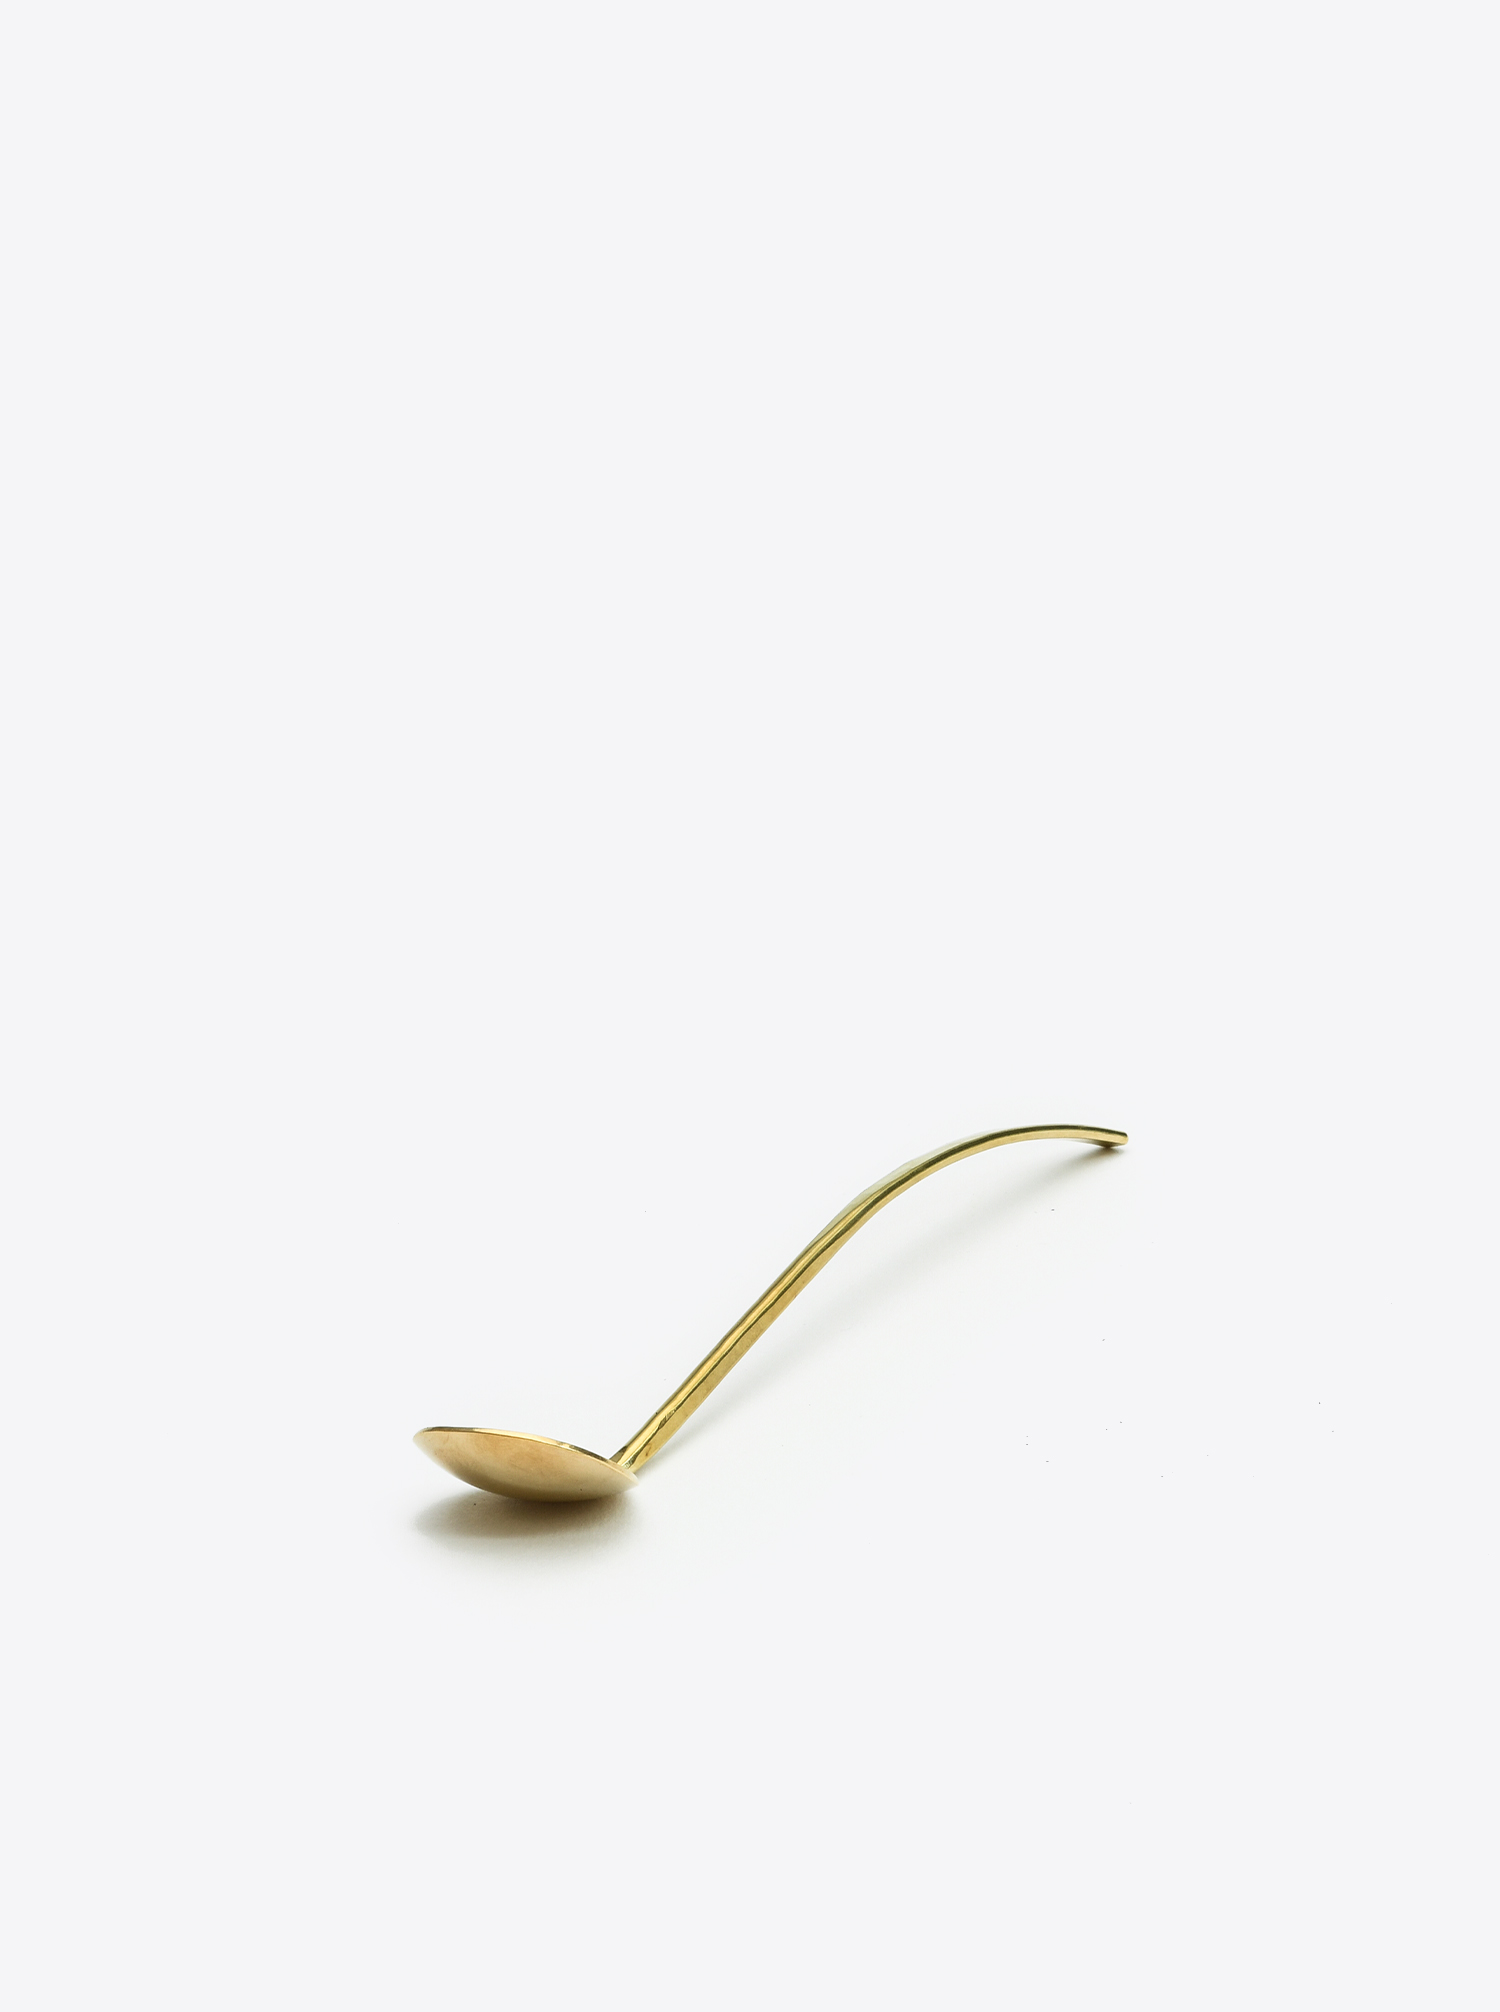 Spoon curved Brass